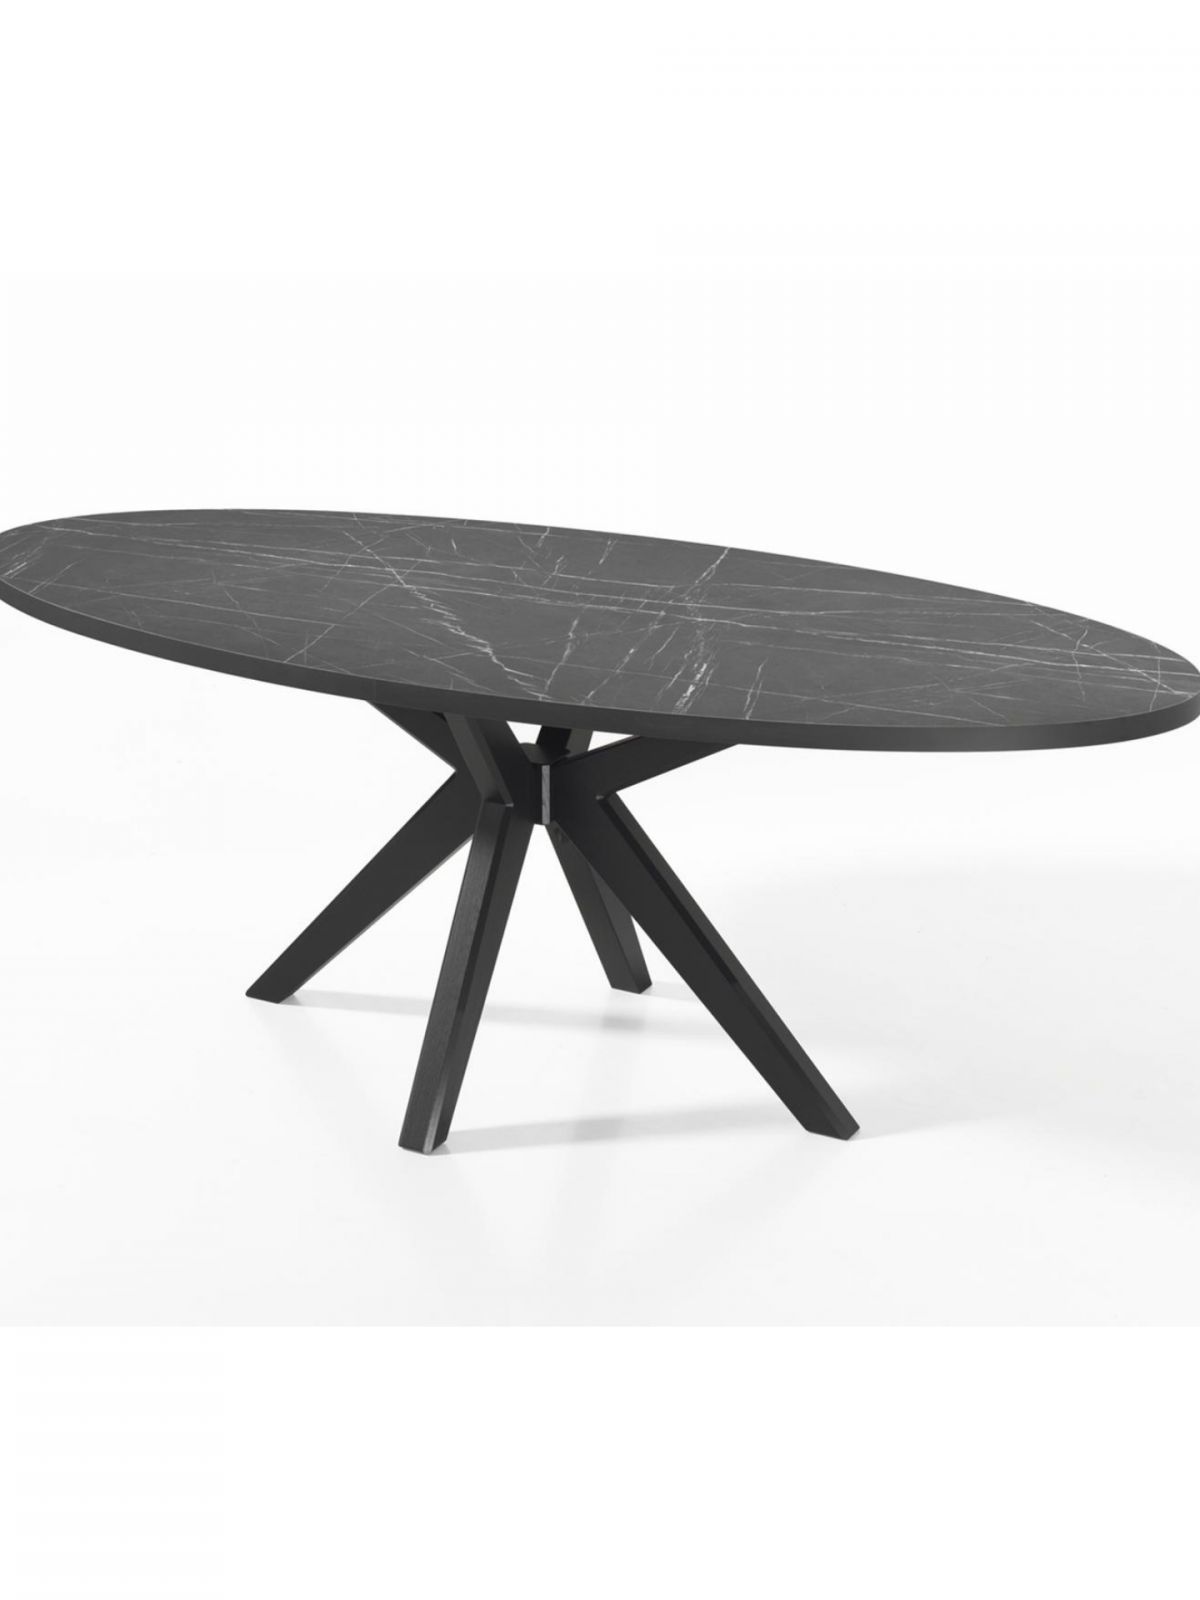 Table ovale fixe 2,40m X-pied massif